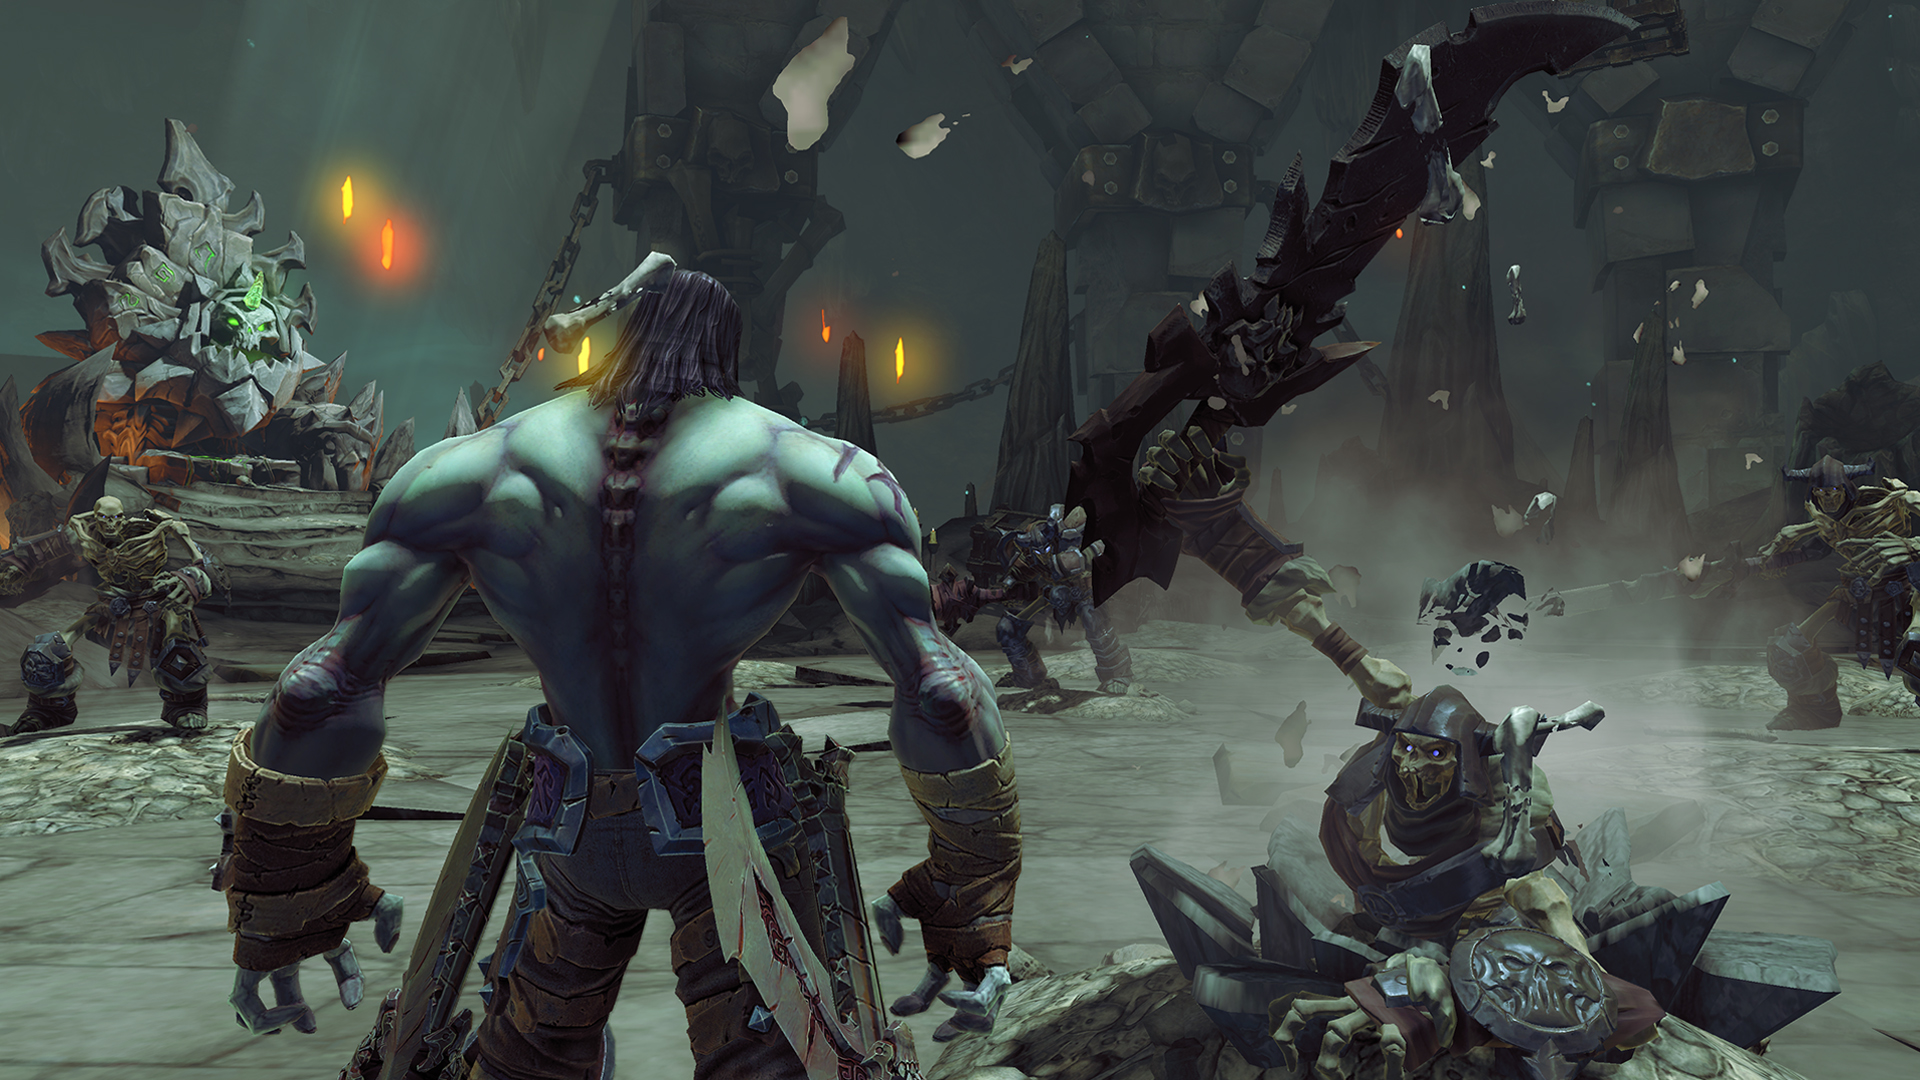 Darksiders III (for PC) Review